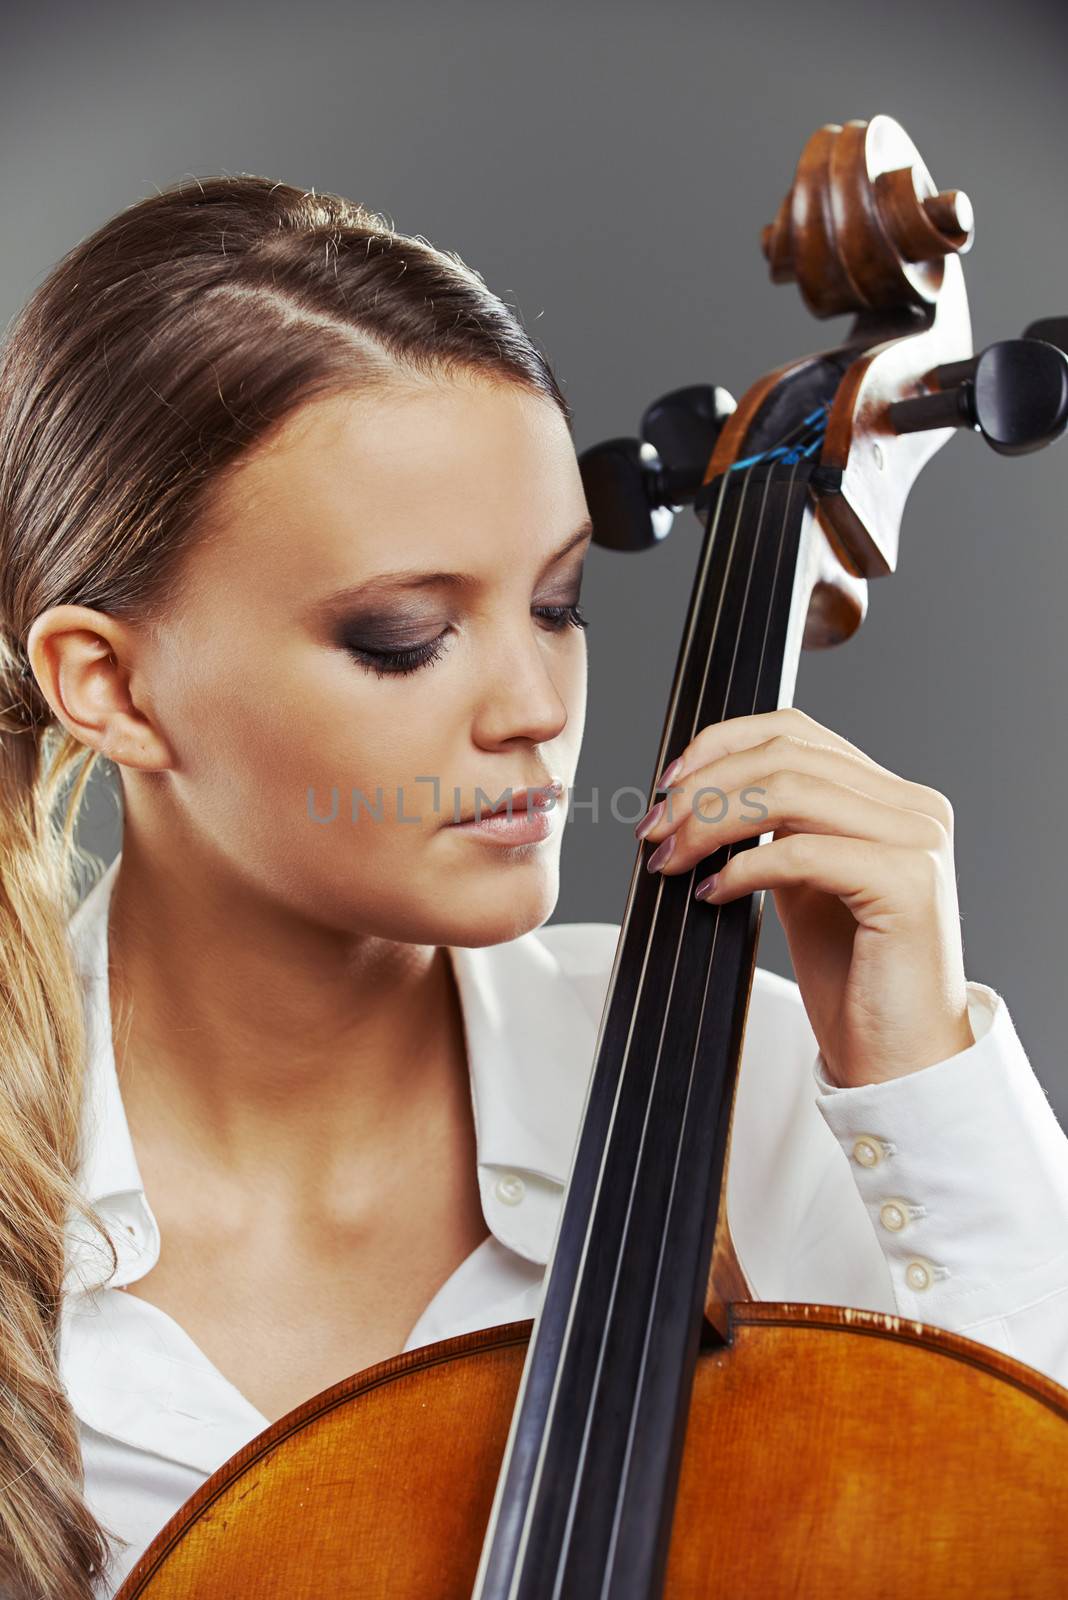 Close up portrait of a blond woman playing cello